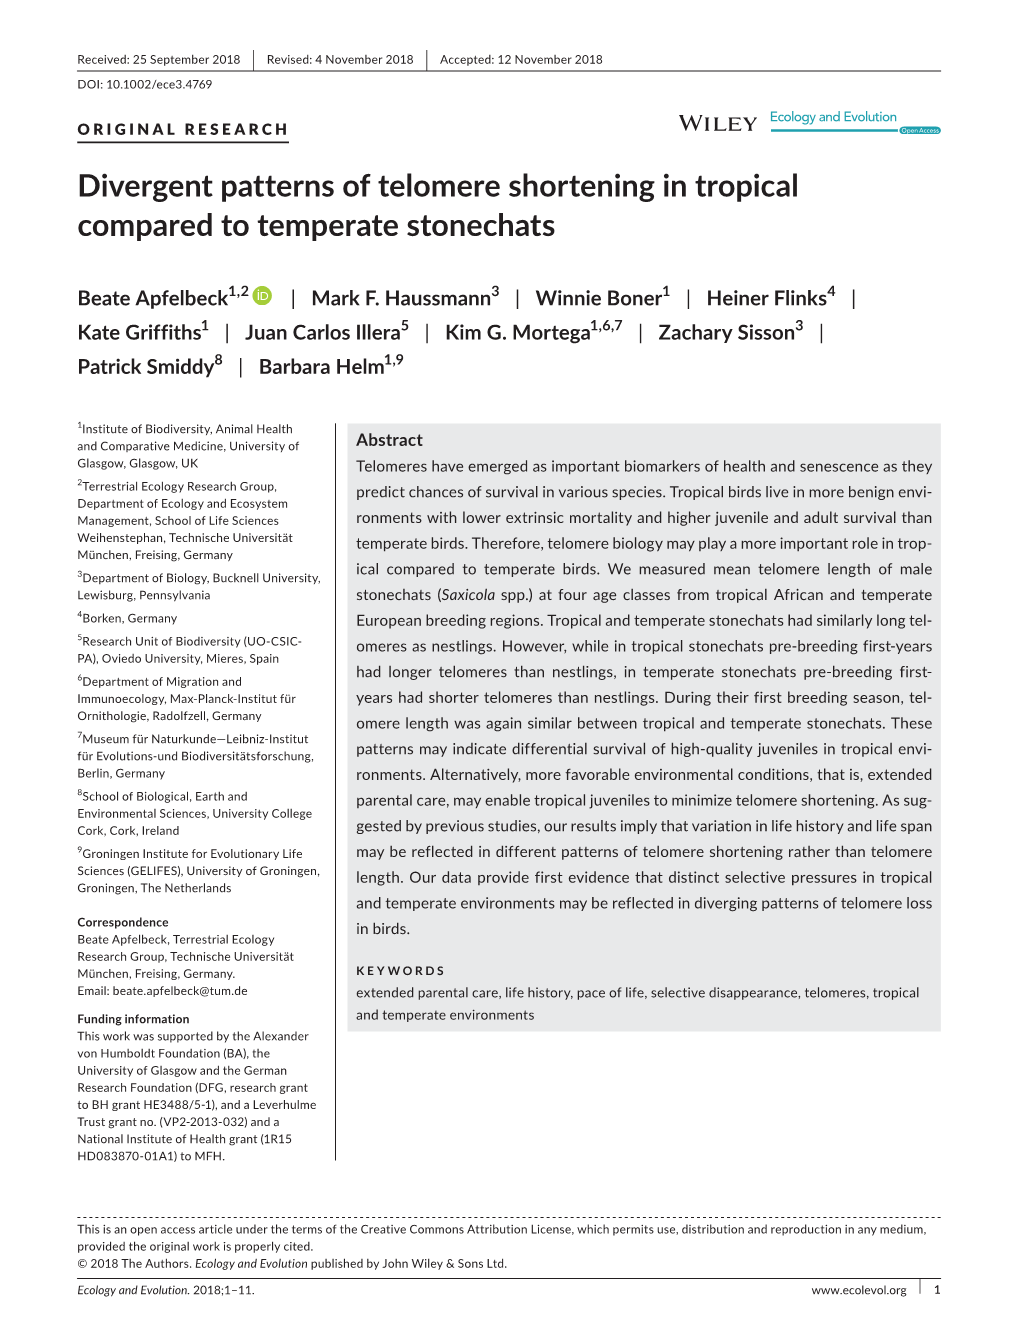 Divergent Patterns of Telomere Shortening in Tropical Compared to Temperate Stonechats